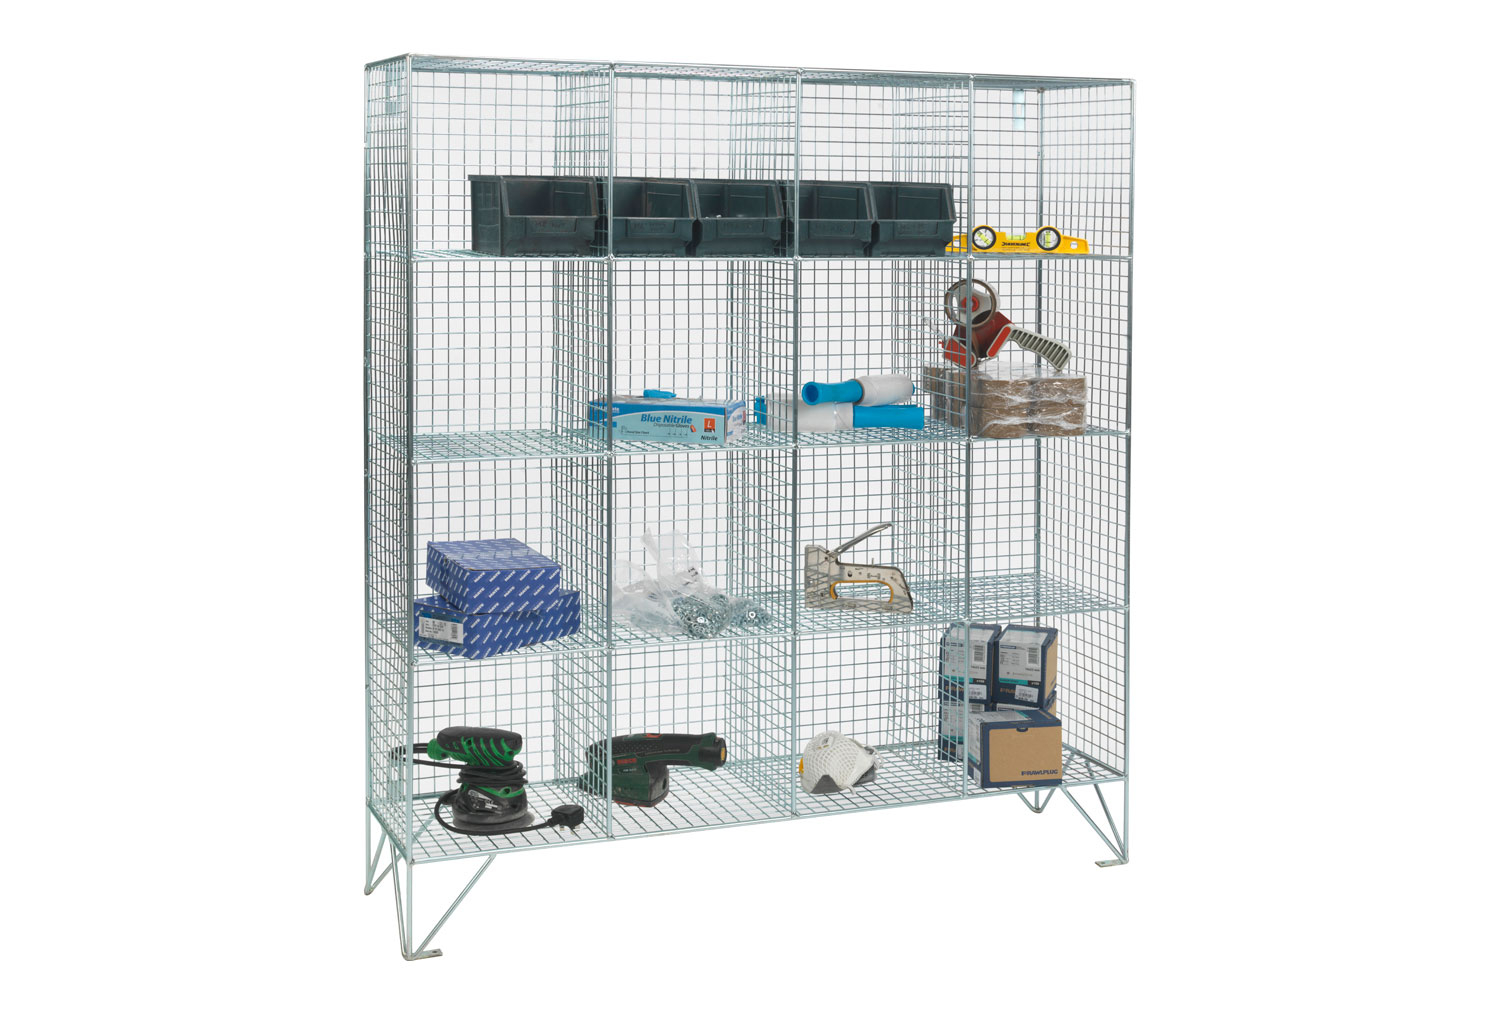 Express Delivery Premium 16 Multi Compartment Wire Mesh Lockers, 122wx46dx137h (cm)